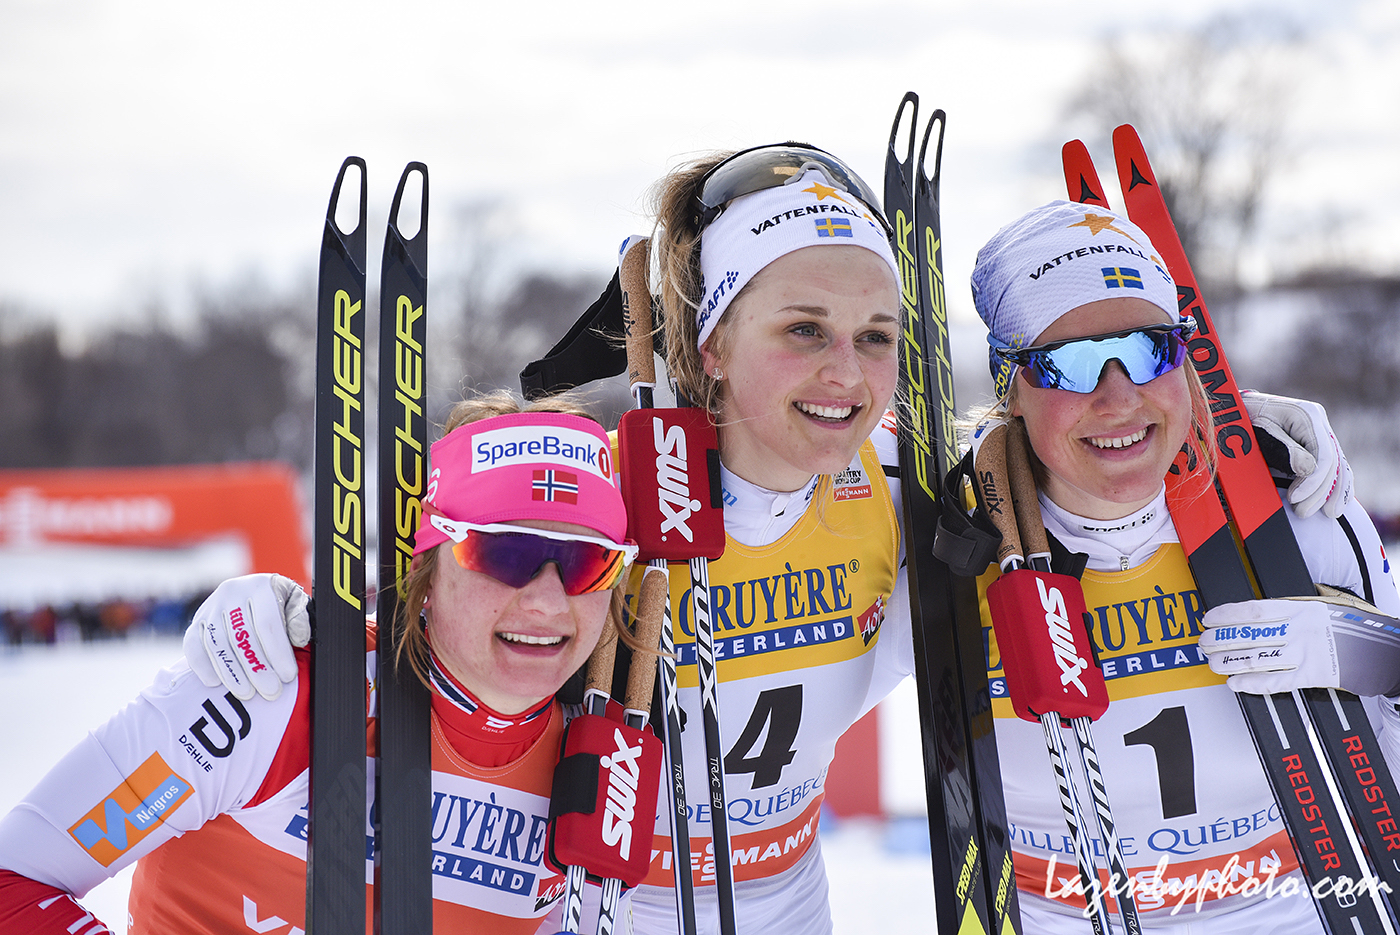 Another Sprint Victory for Nilsson; Falla Defends Sprint Crystal Globe in Quebec